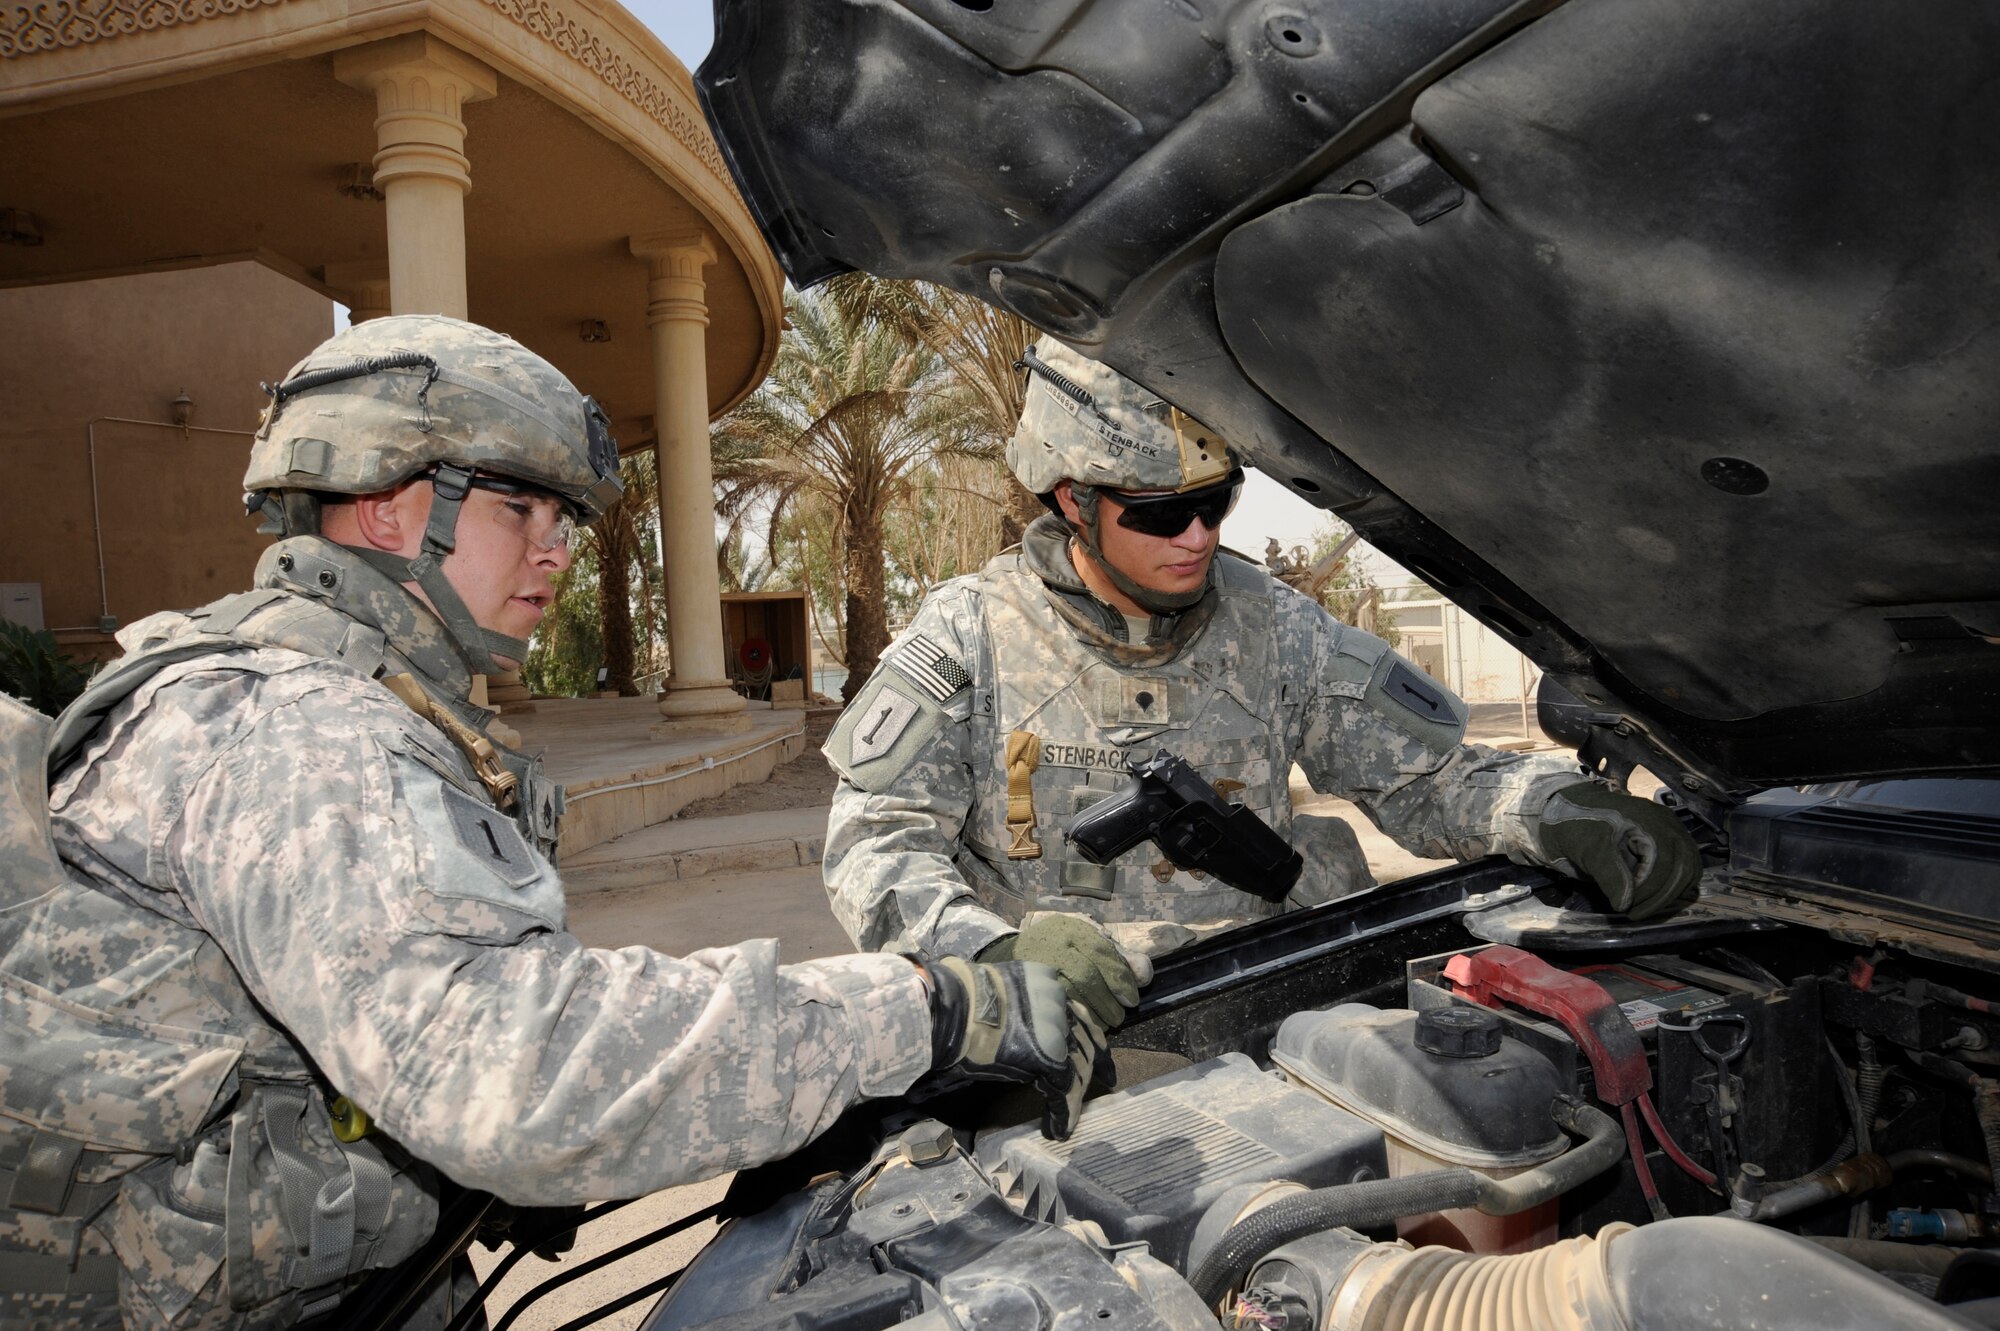 BAGHDAD, Iraq - Prior to the start of a mission, Army Staff Sgt. Justin Conway (left) and Spc. Andrew Stenback (right) perform preventative maintenance checks on their vehicle to ensure it will function properly during missions here July 20, 2009. The personal security detail team provides constant security to ensure the individual they are assigned to is transported safely and securely to, from and inside various locations. Sergeant Conway is originally from Denver, Colo., and Specialist Stenback is from Miami, Fla. Both are deployed from the 2nd Brigade Heavy Combat Team, 1st Infantry Division, Fort Riley, Kan. (U.S. Air Force photo/Tech. Sgt. Johnny L. Saldivar/Released)